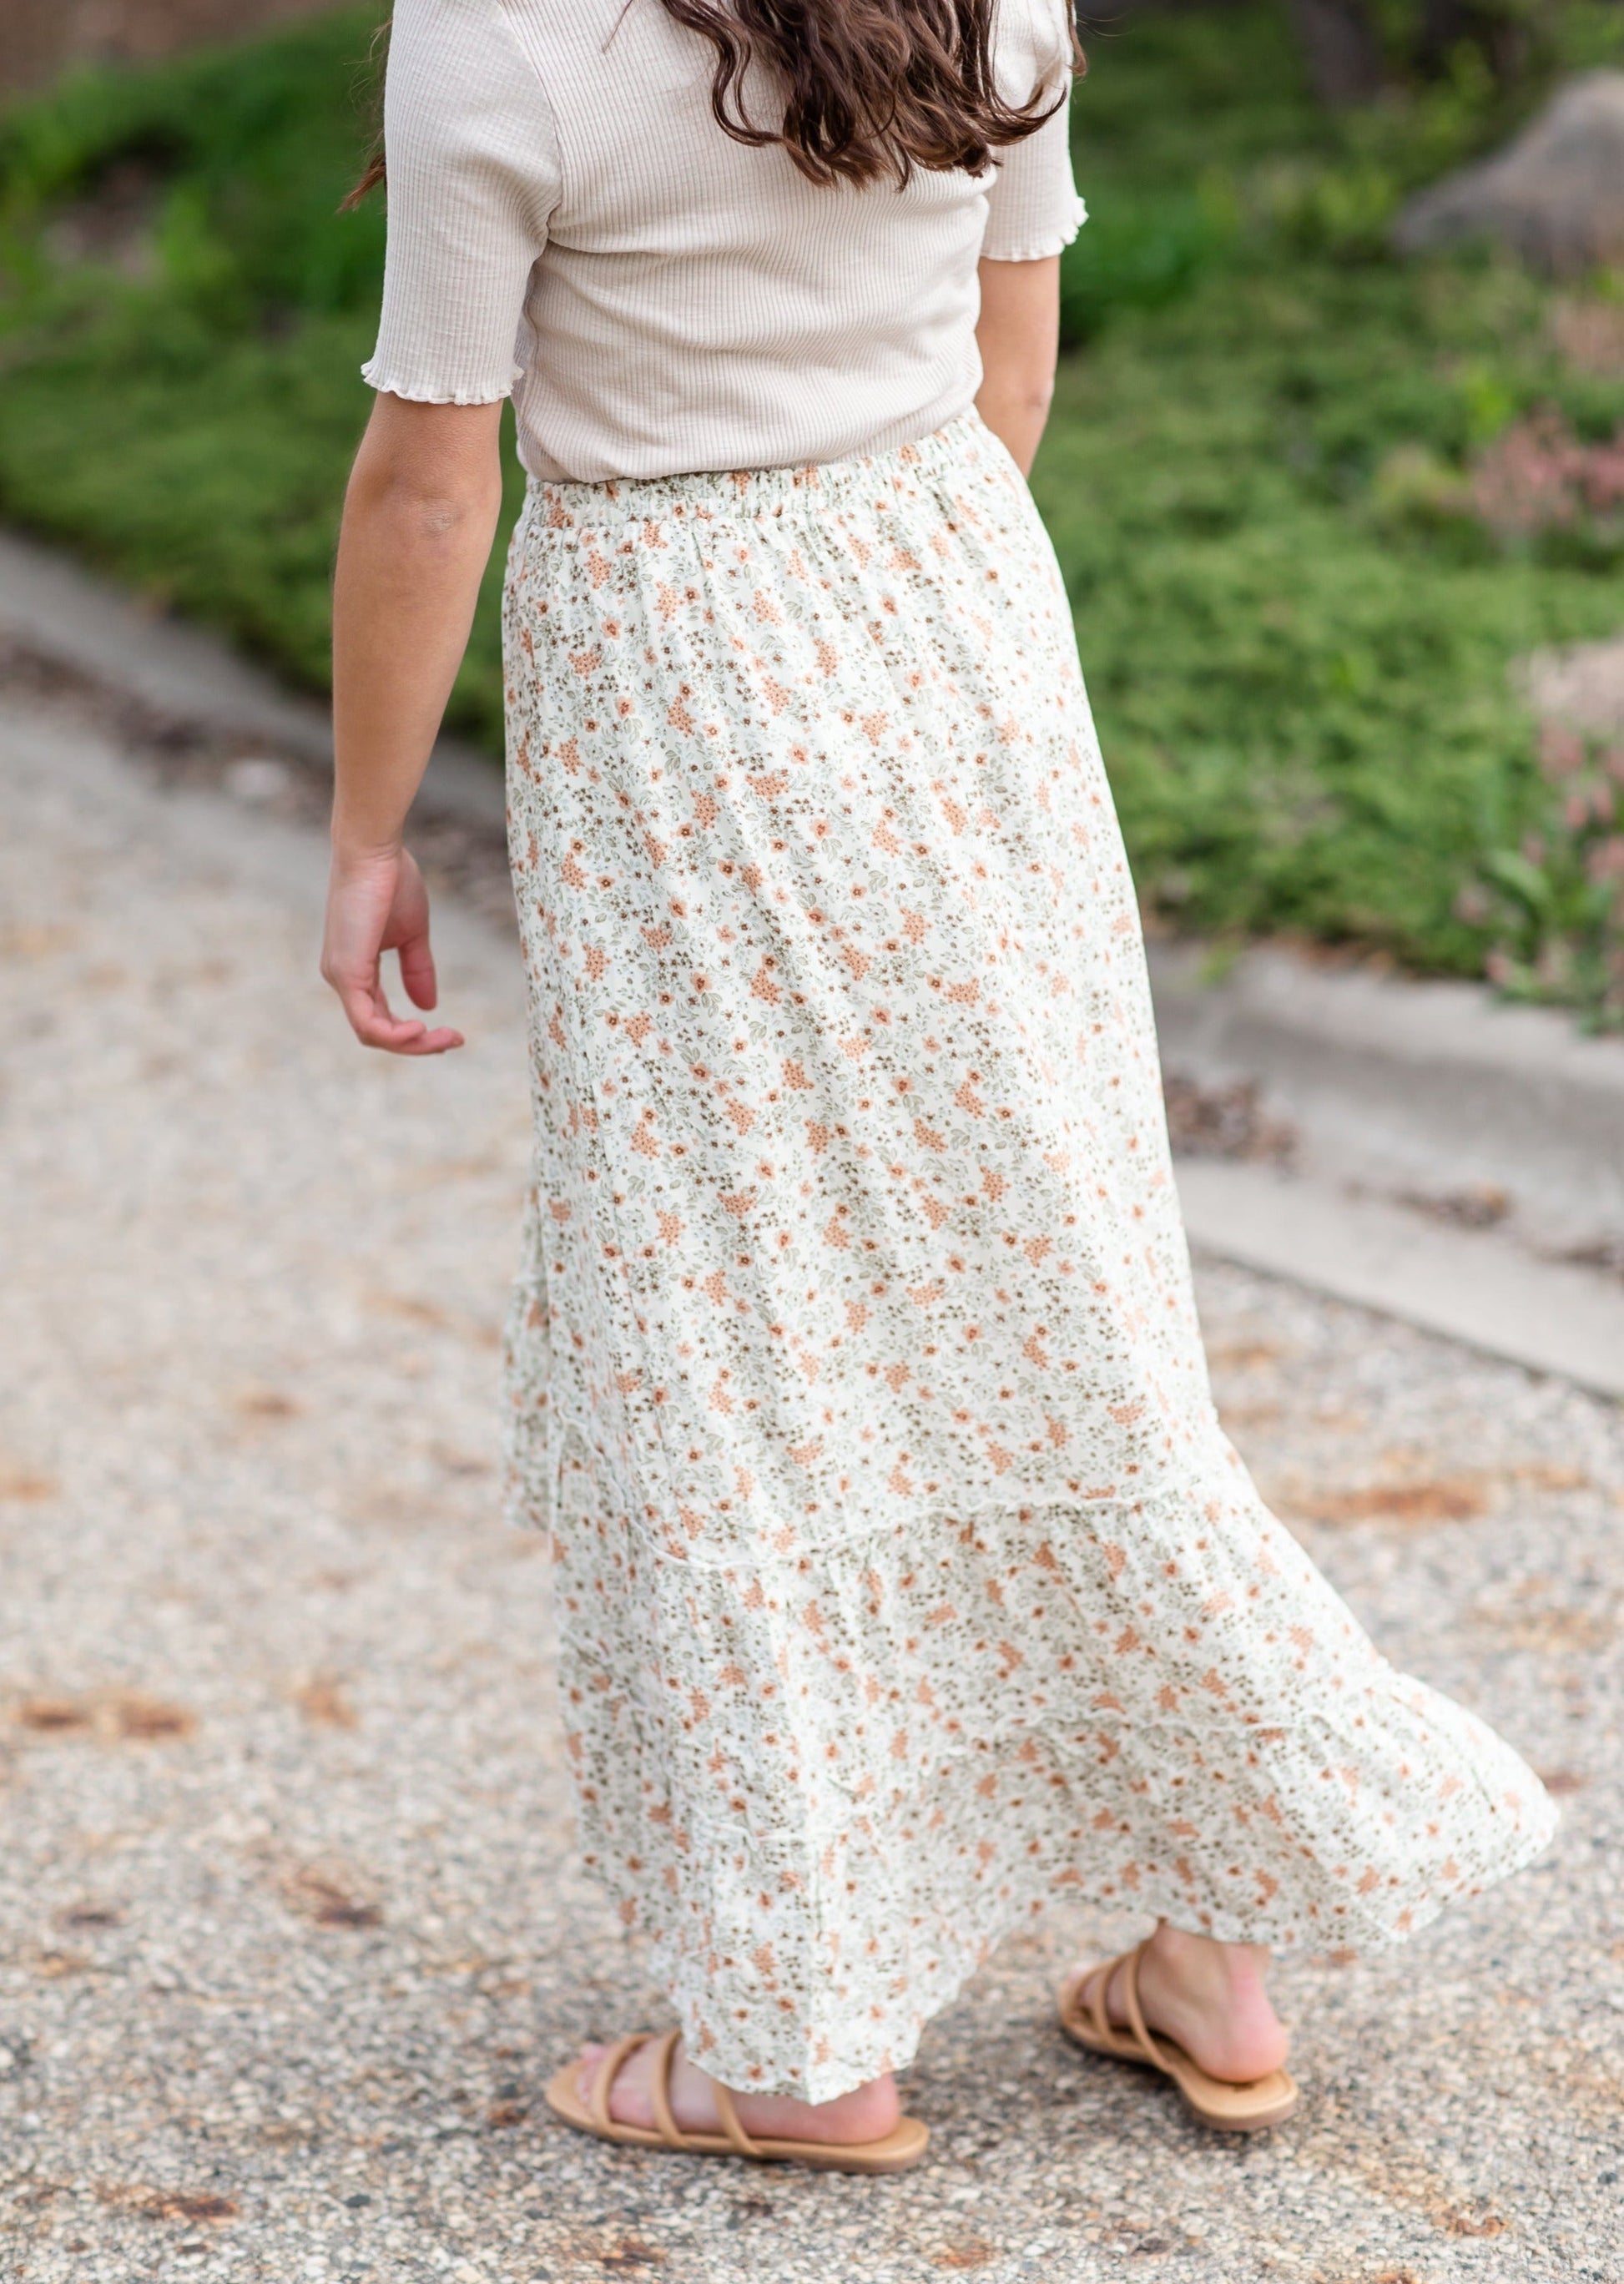 Floral Print Maxi Skirt With Ruffle Detail Skirts